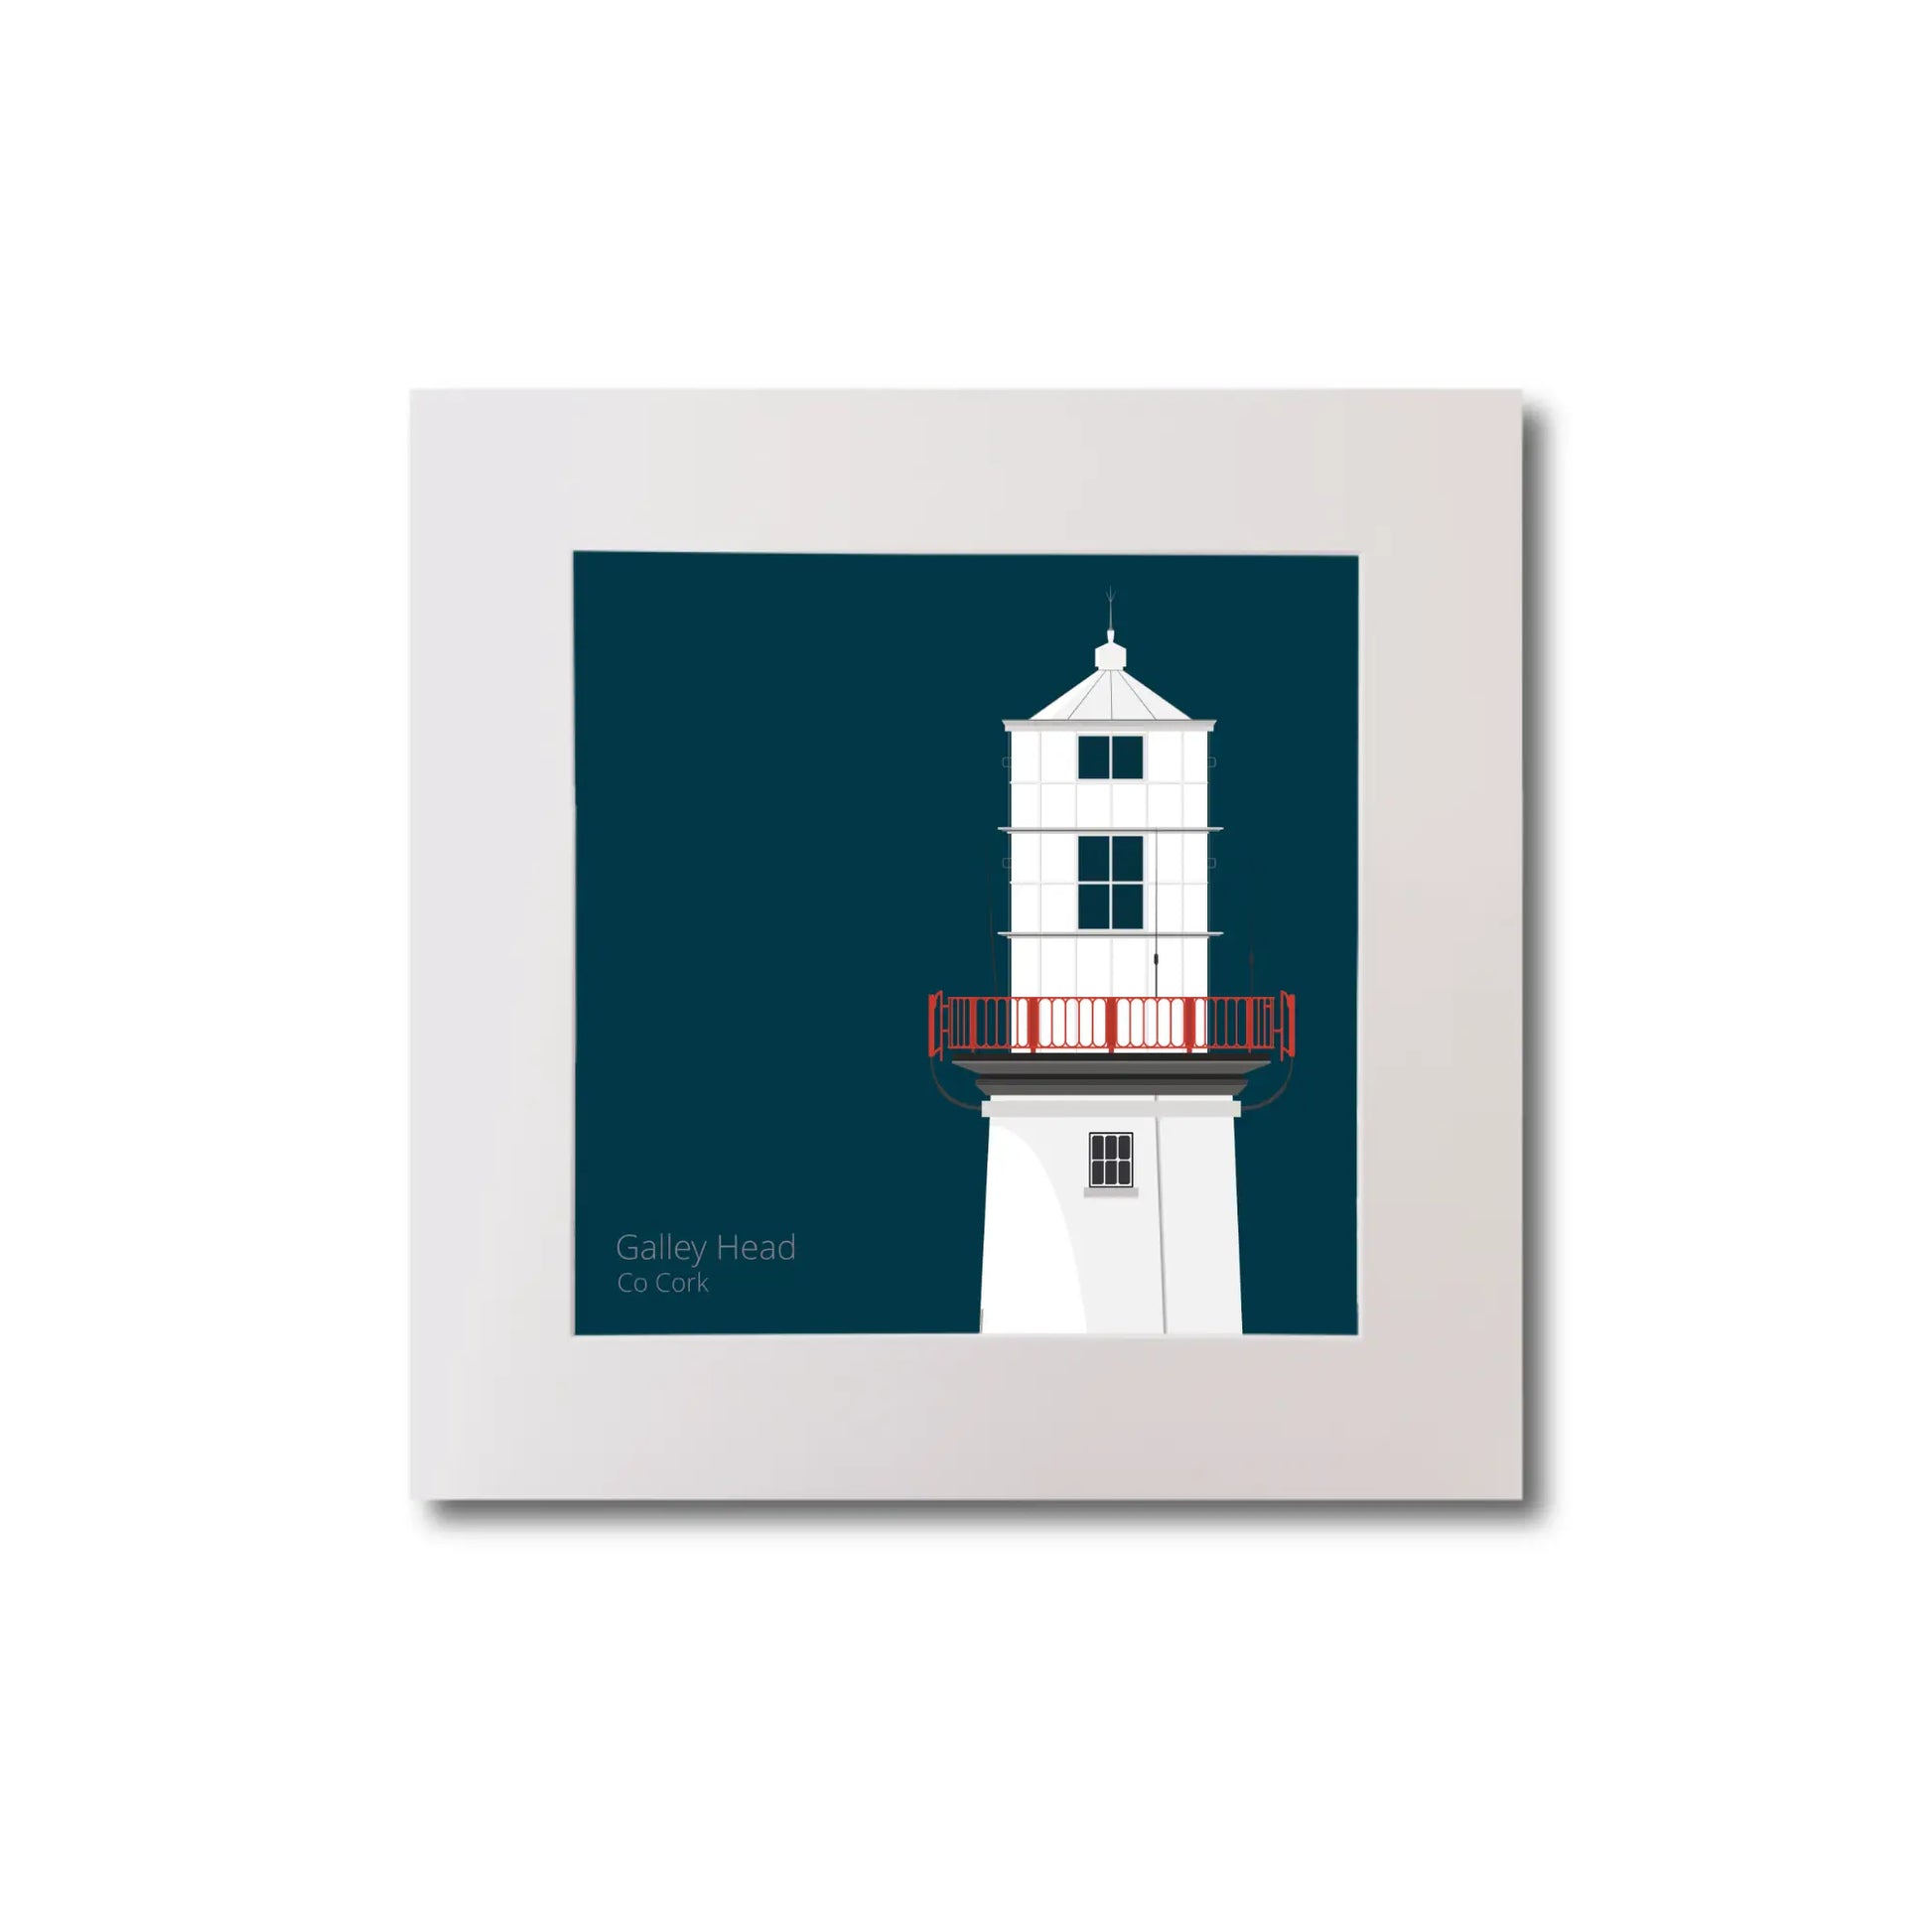 Illustration of Galley Head lighthouse on a midnight blue background, mounted and measuring 20x20cm.